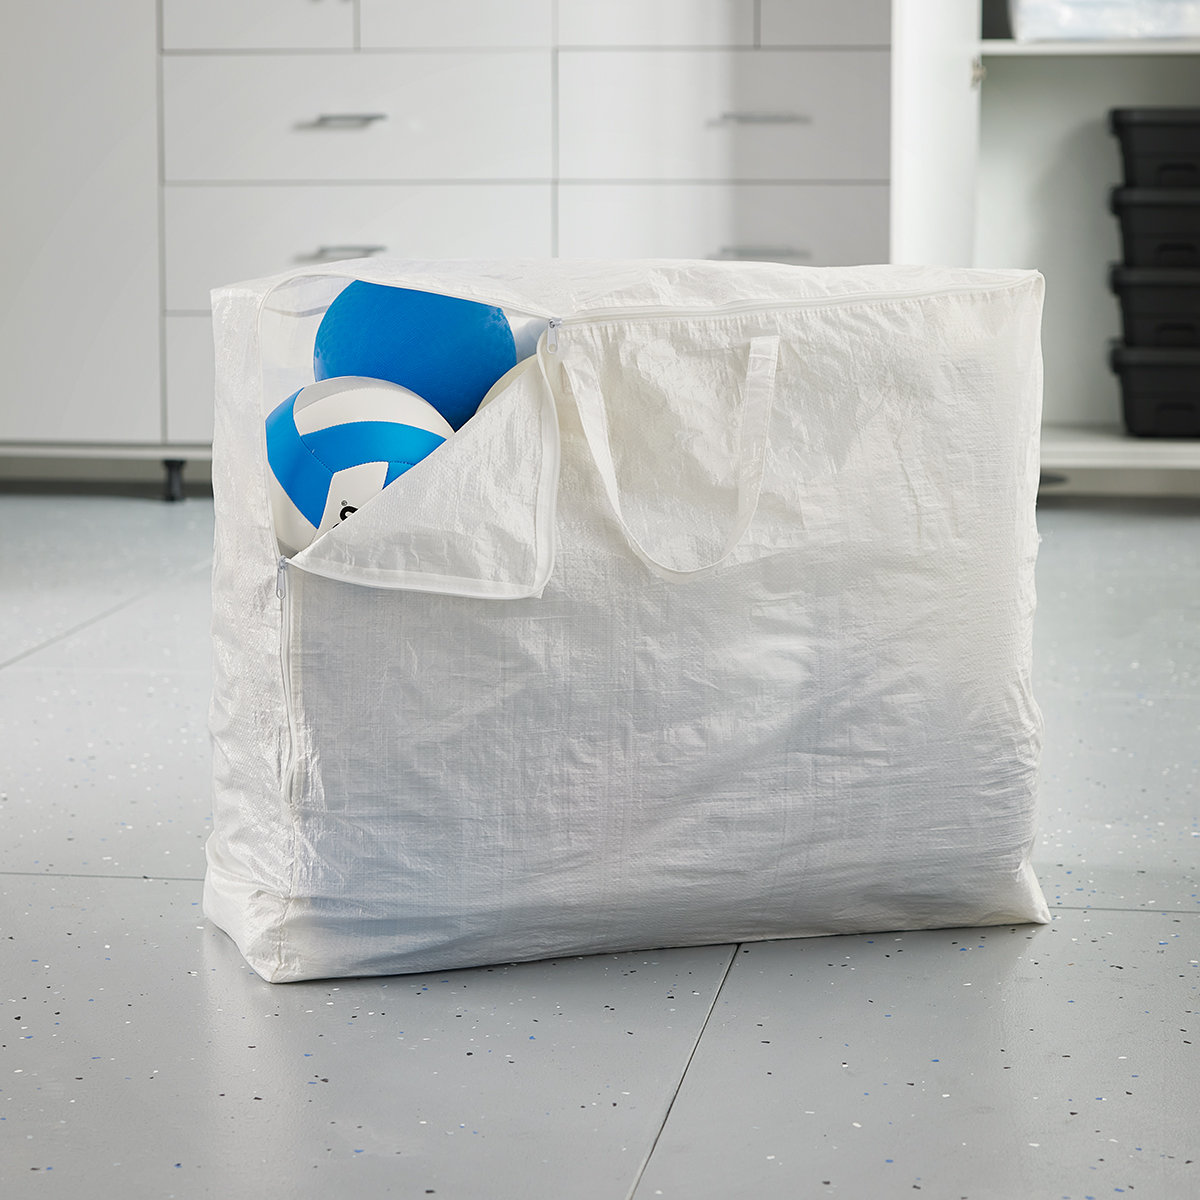 https://www.containerstore.com/catalogimages/515624/100913373-all-purpose-storage-bag-30.jpg